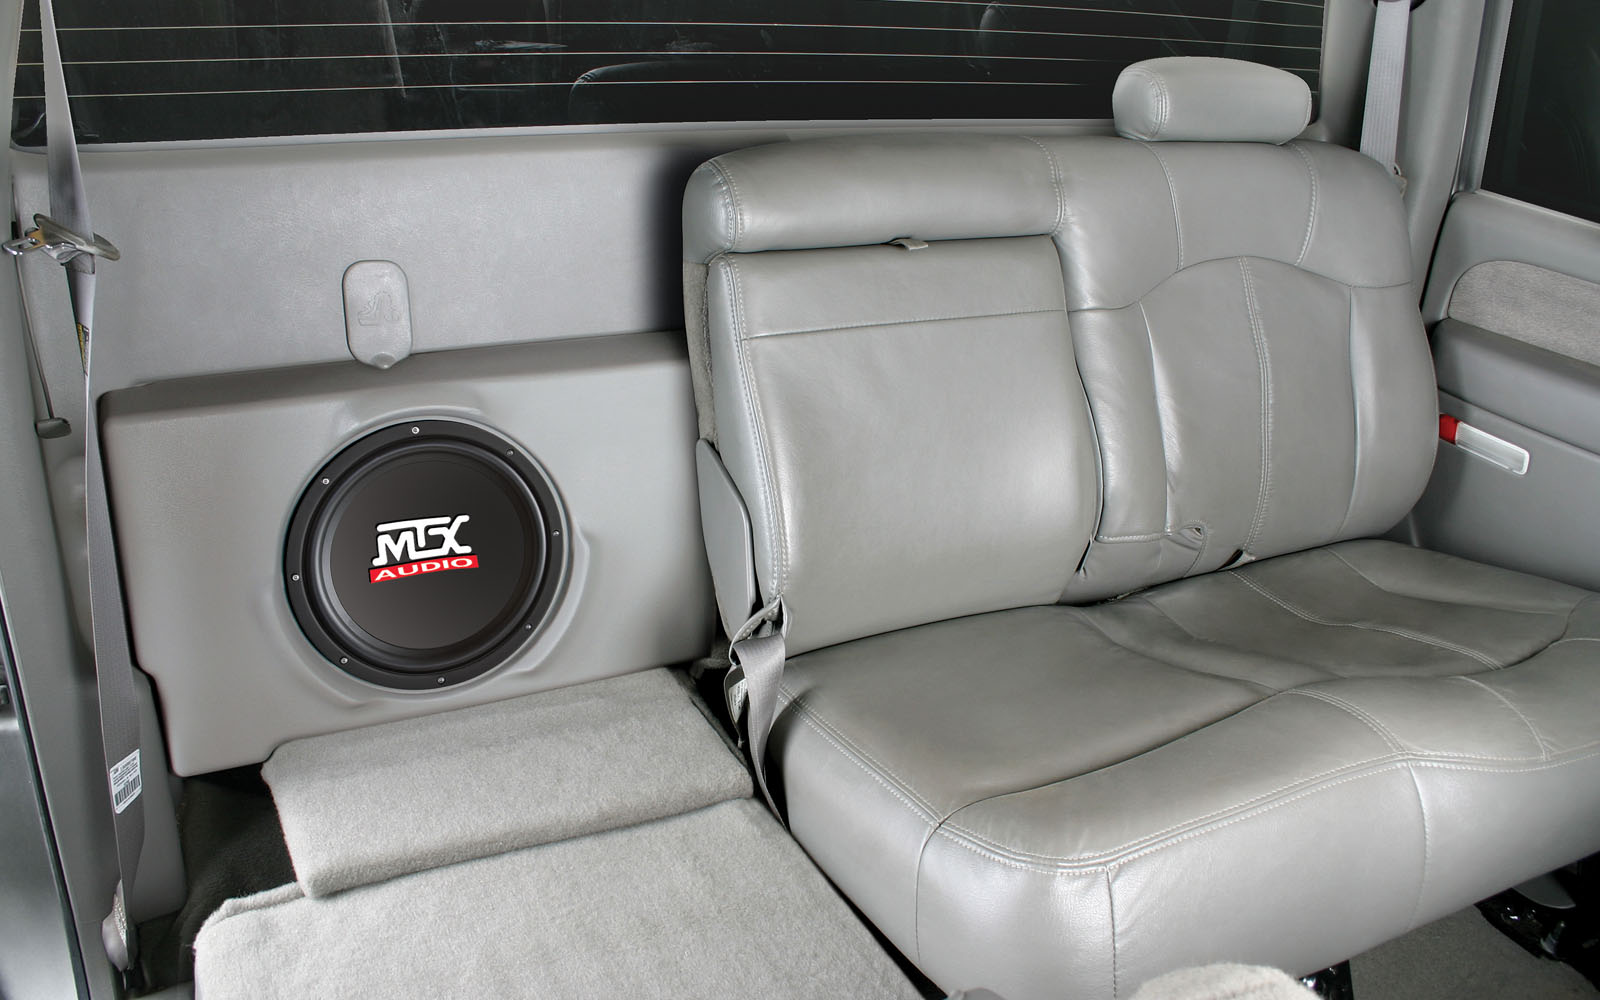 Chevrolet Silverado 2500 3500 Crew Cab Loaded Dual 10 Inch 400w Rms 4 Ohm Vehicle Specific Custom Subwoofer Enclosure